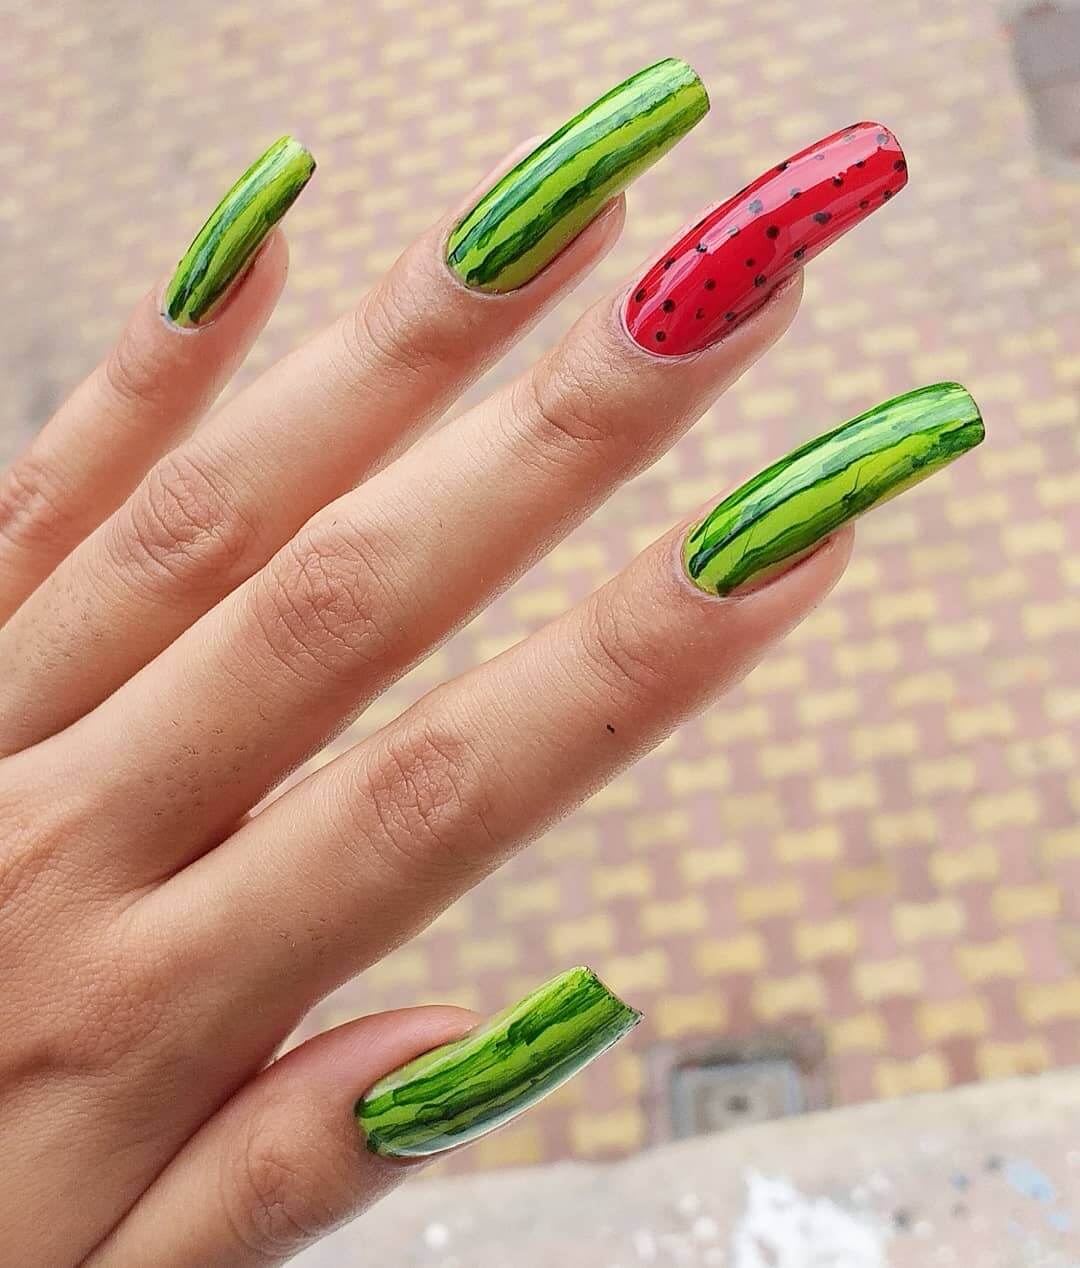 CLASSY CLAWS OF MELON